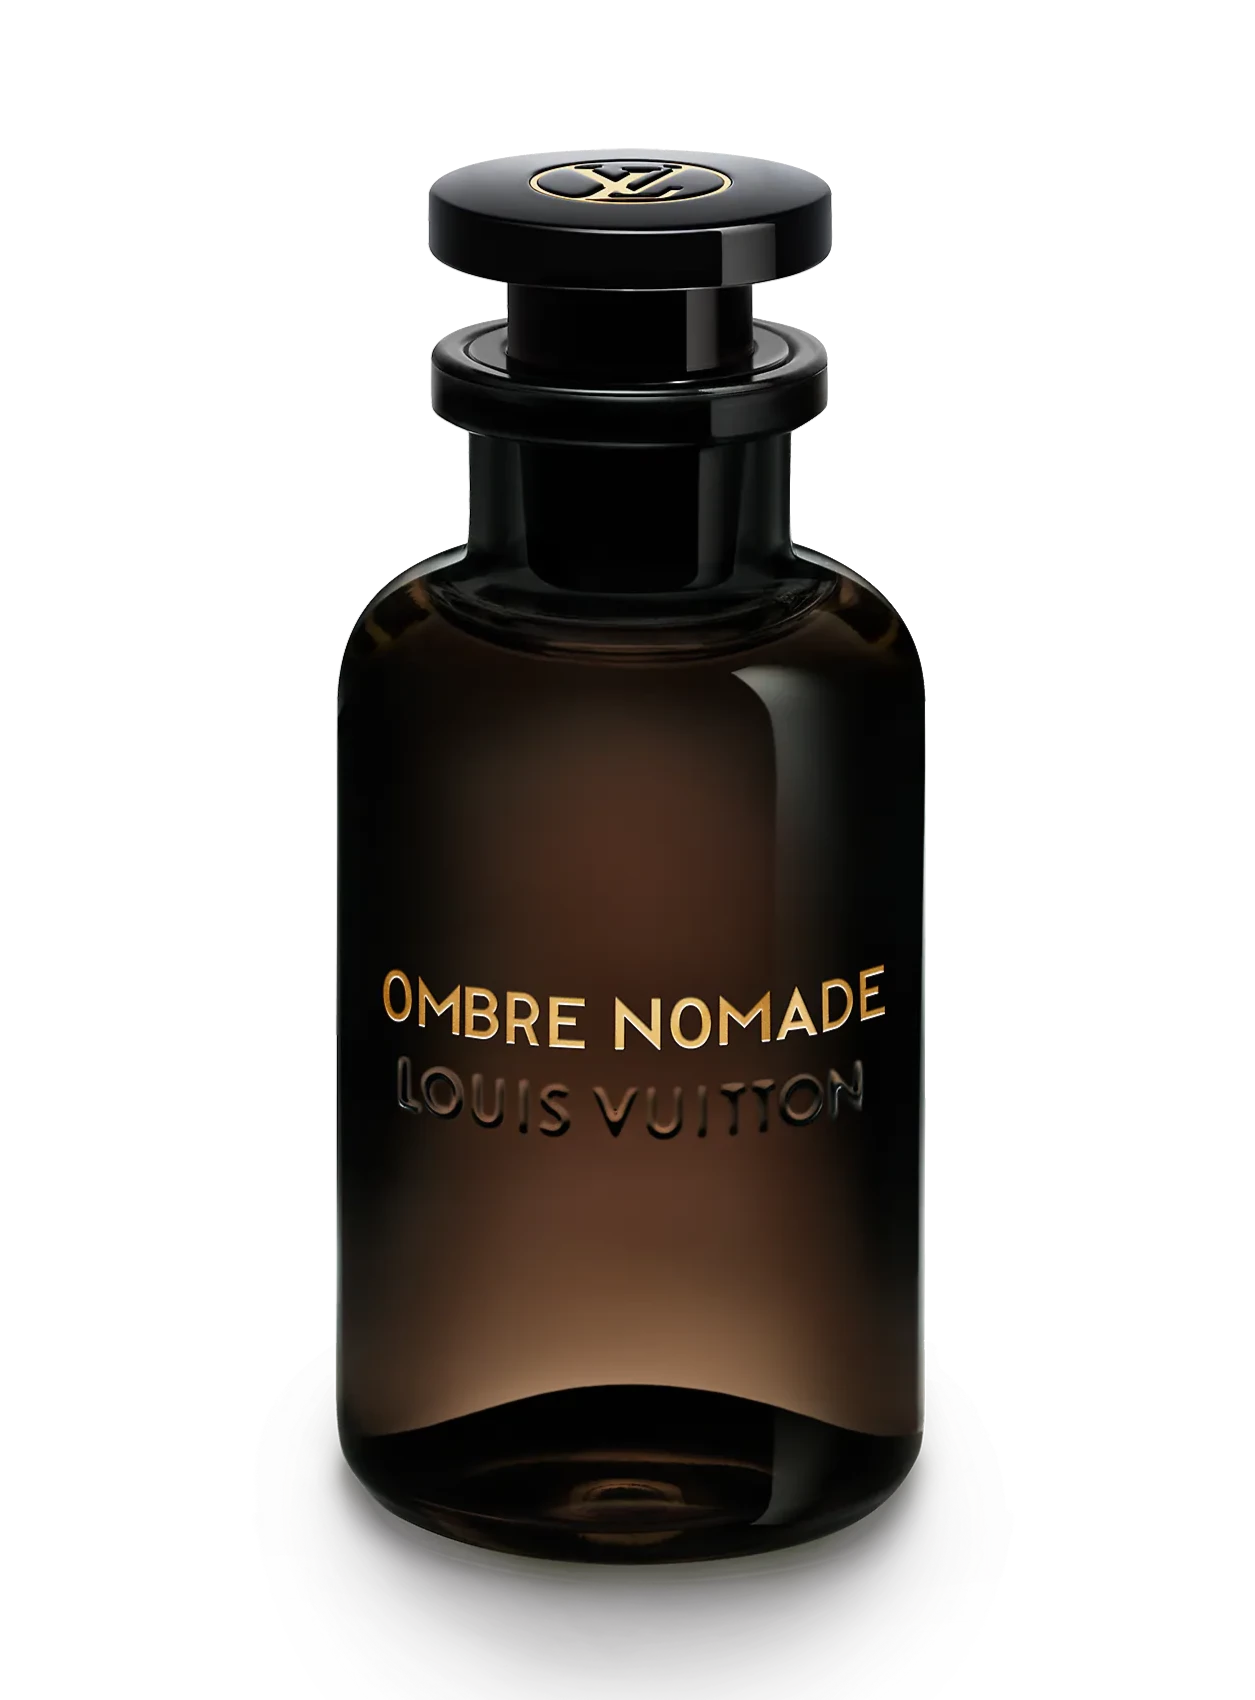 OMBRE NOMADE